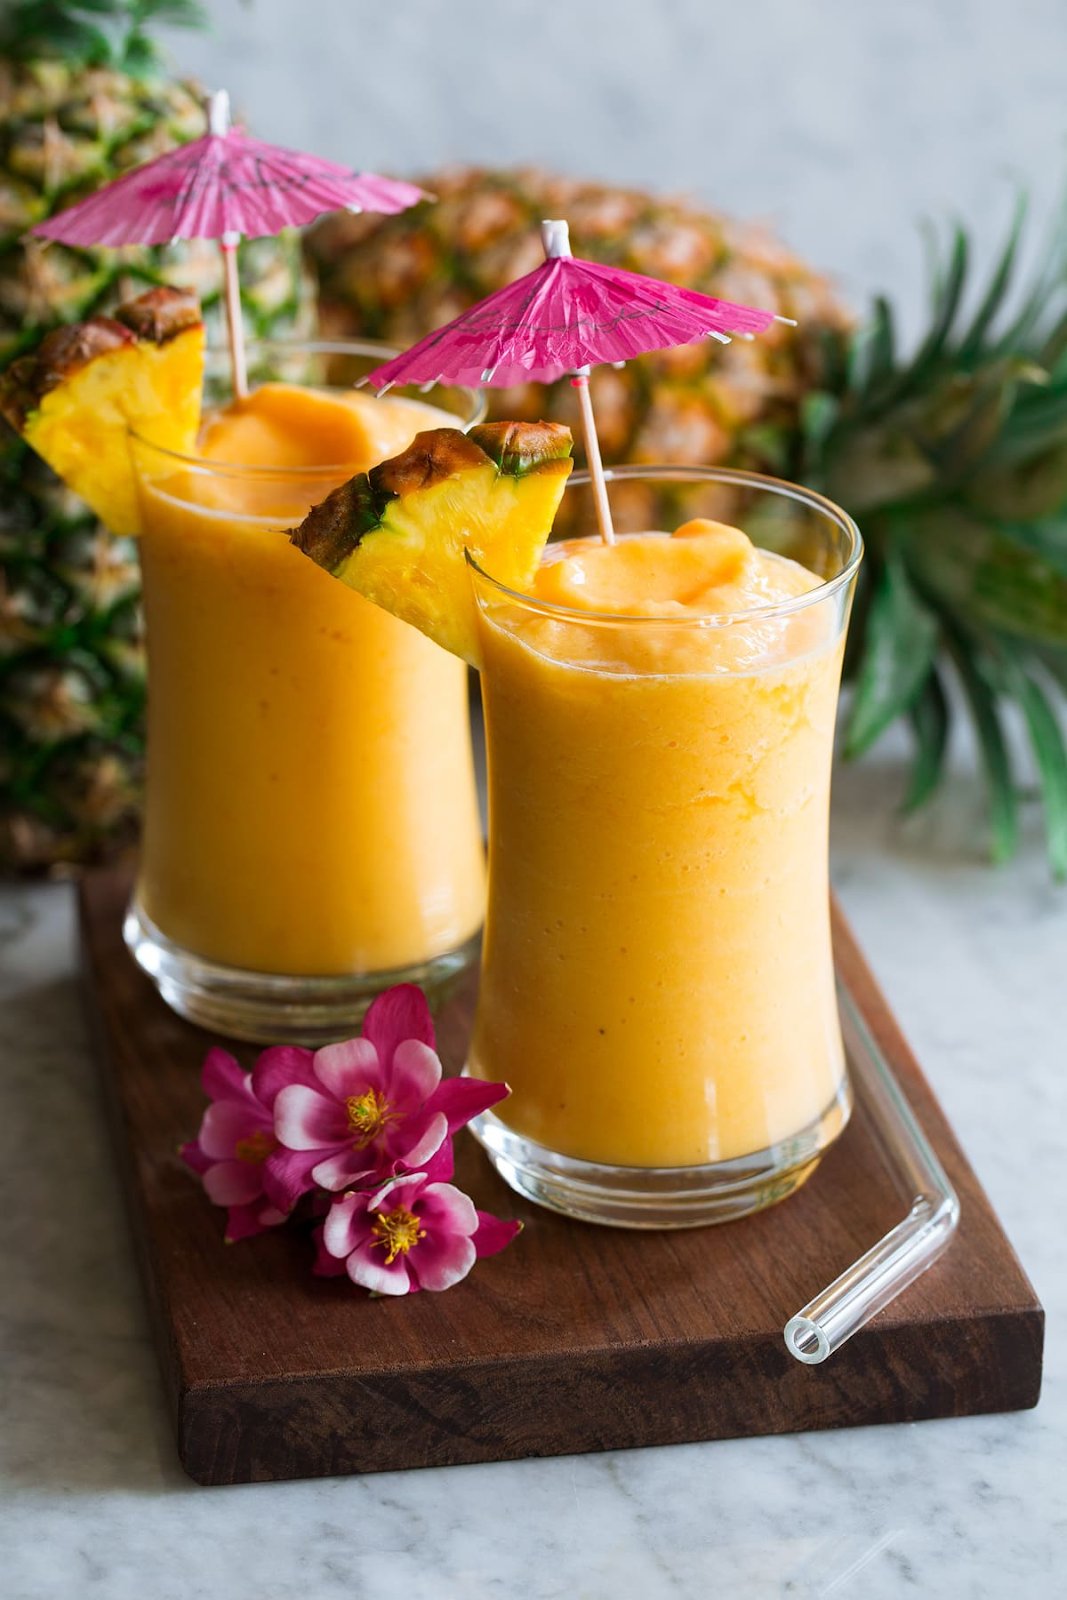 A tropical smoothie is a good drink for summer